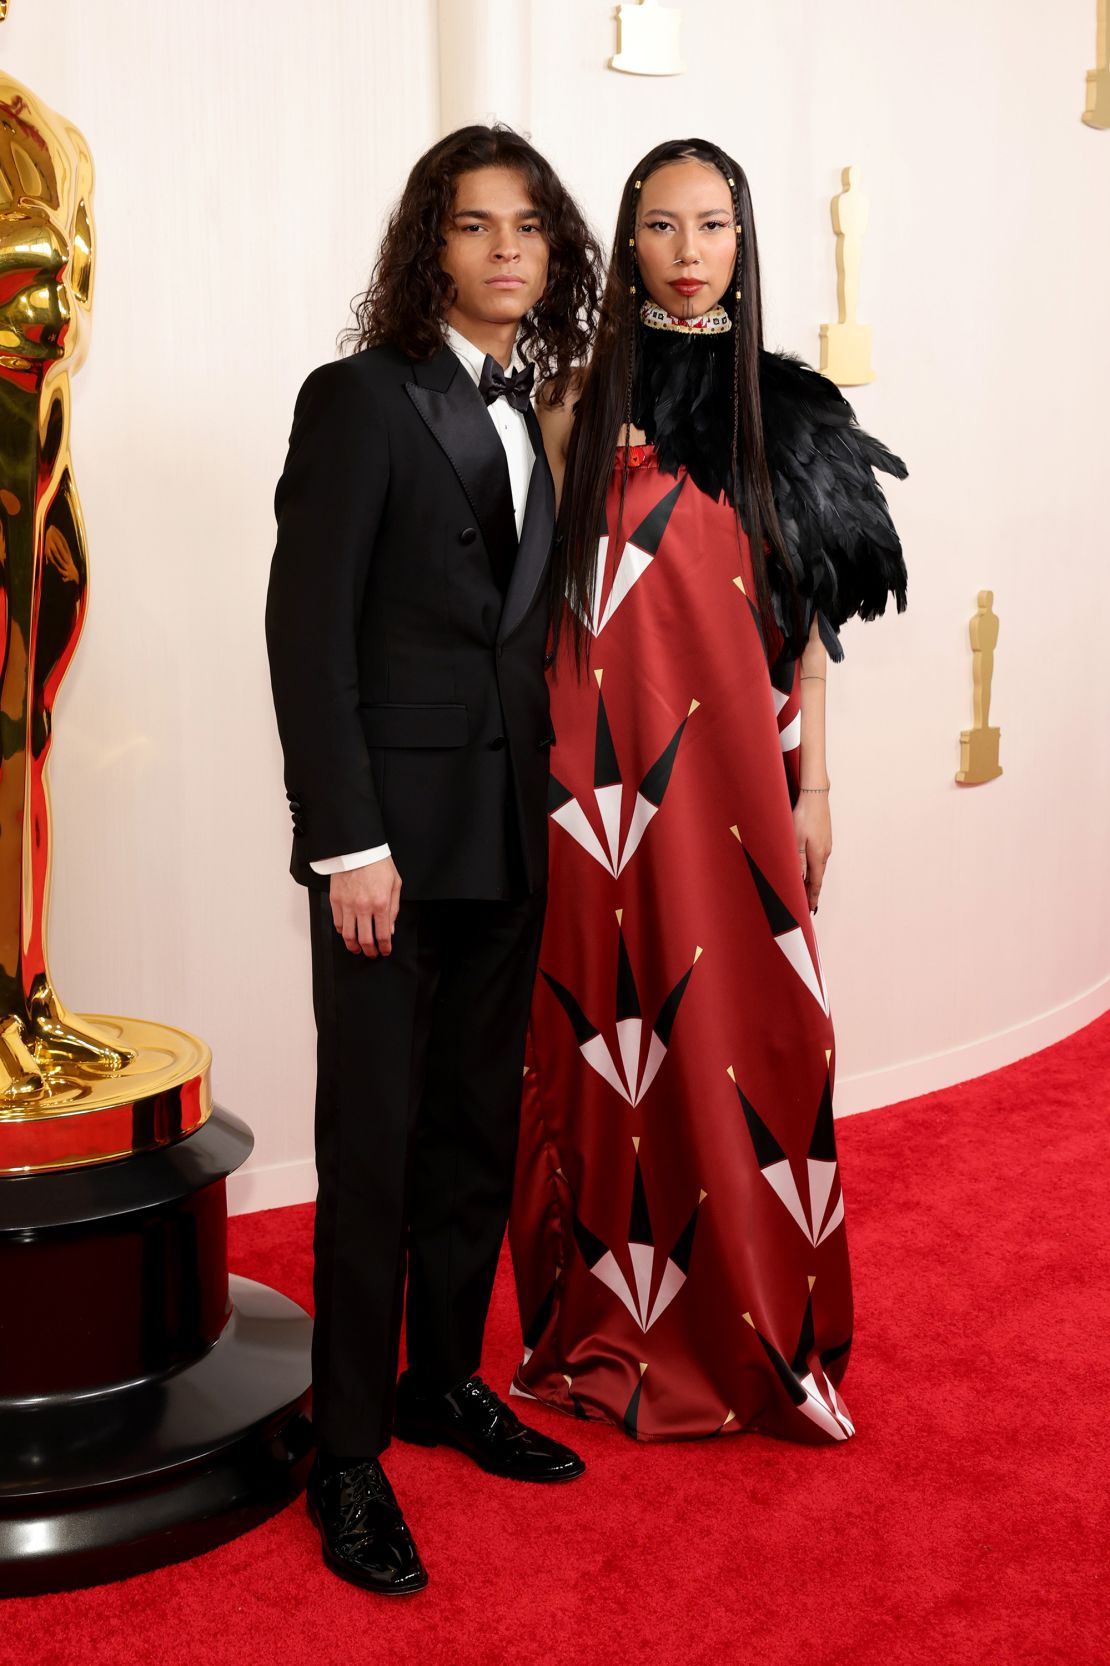 "Reservation Dogs" actor D'Pharaoh Woon-A-Tai wore a double-breasted Dolce & Gabbana suit, while model and activist Quannah Chasinghorse opted for a look by Native American fashion line Red Berry Woman.